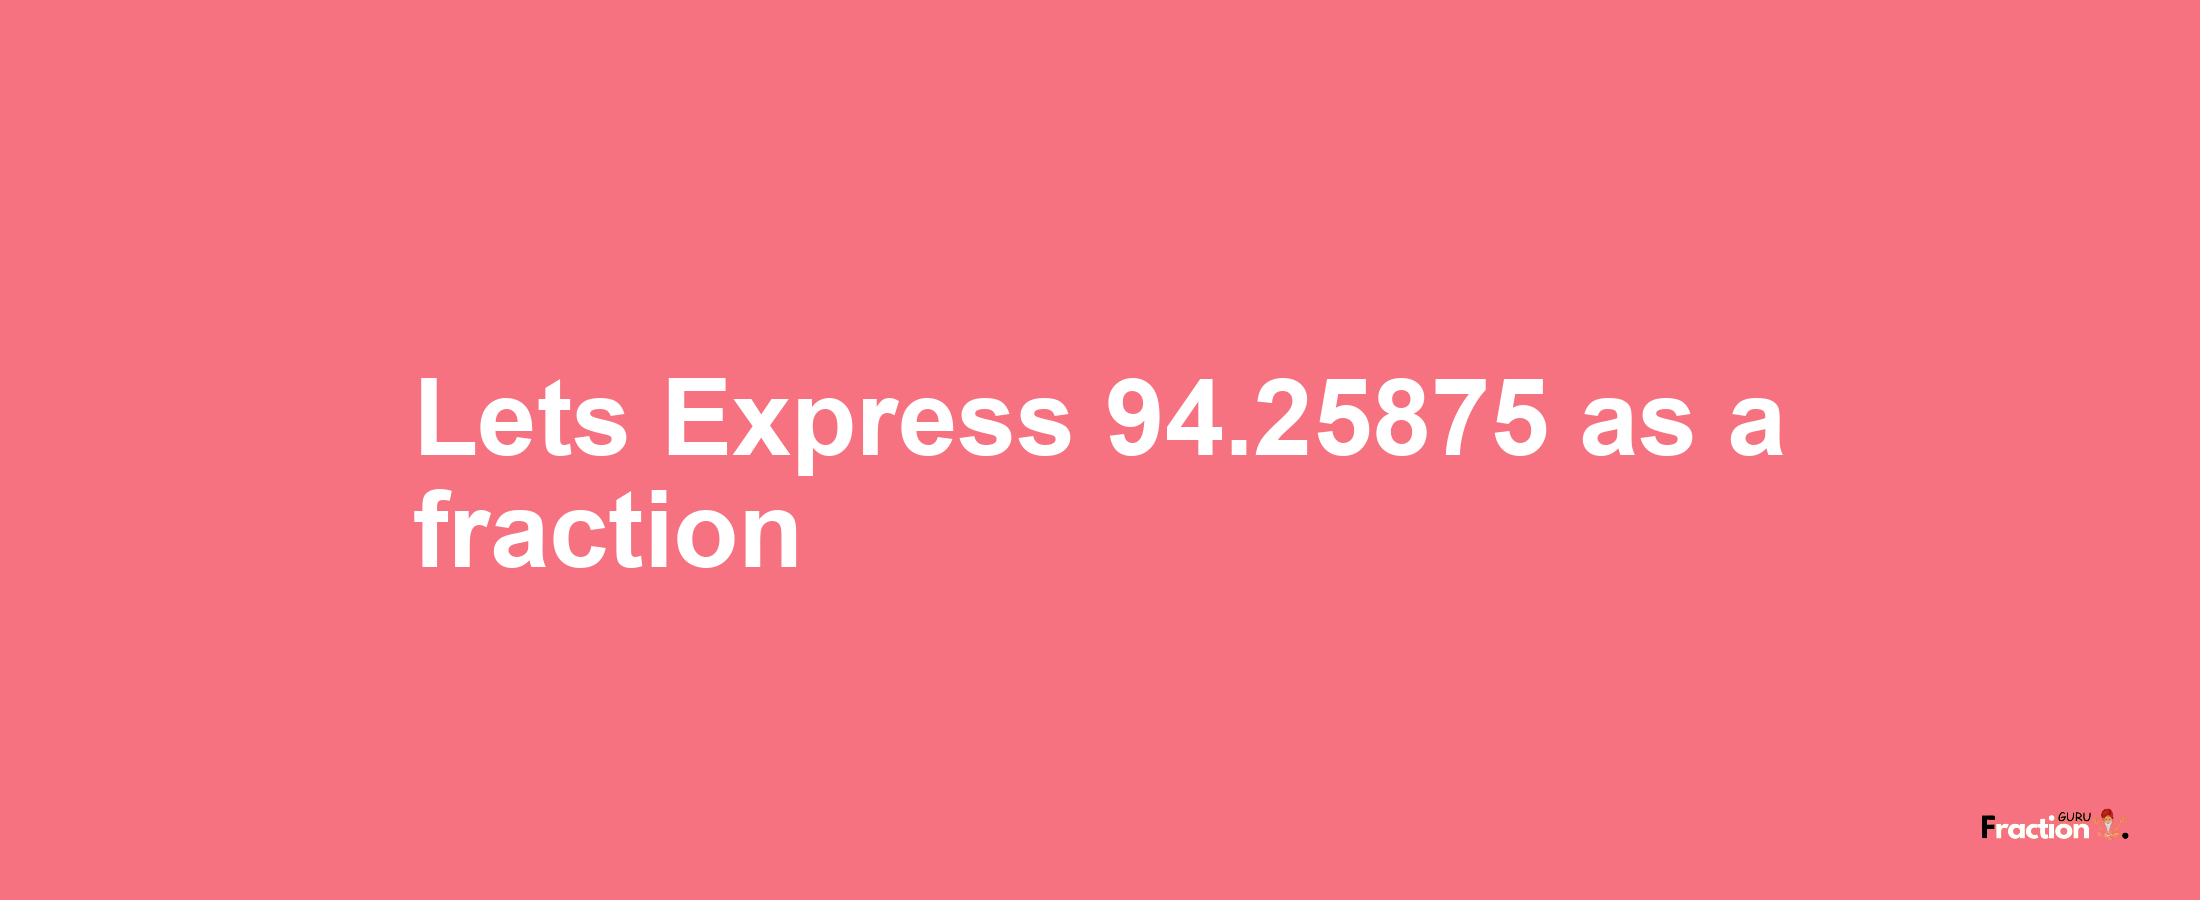 Lets Express 94.25875 as afraction